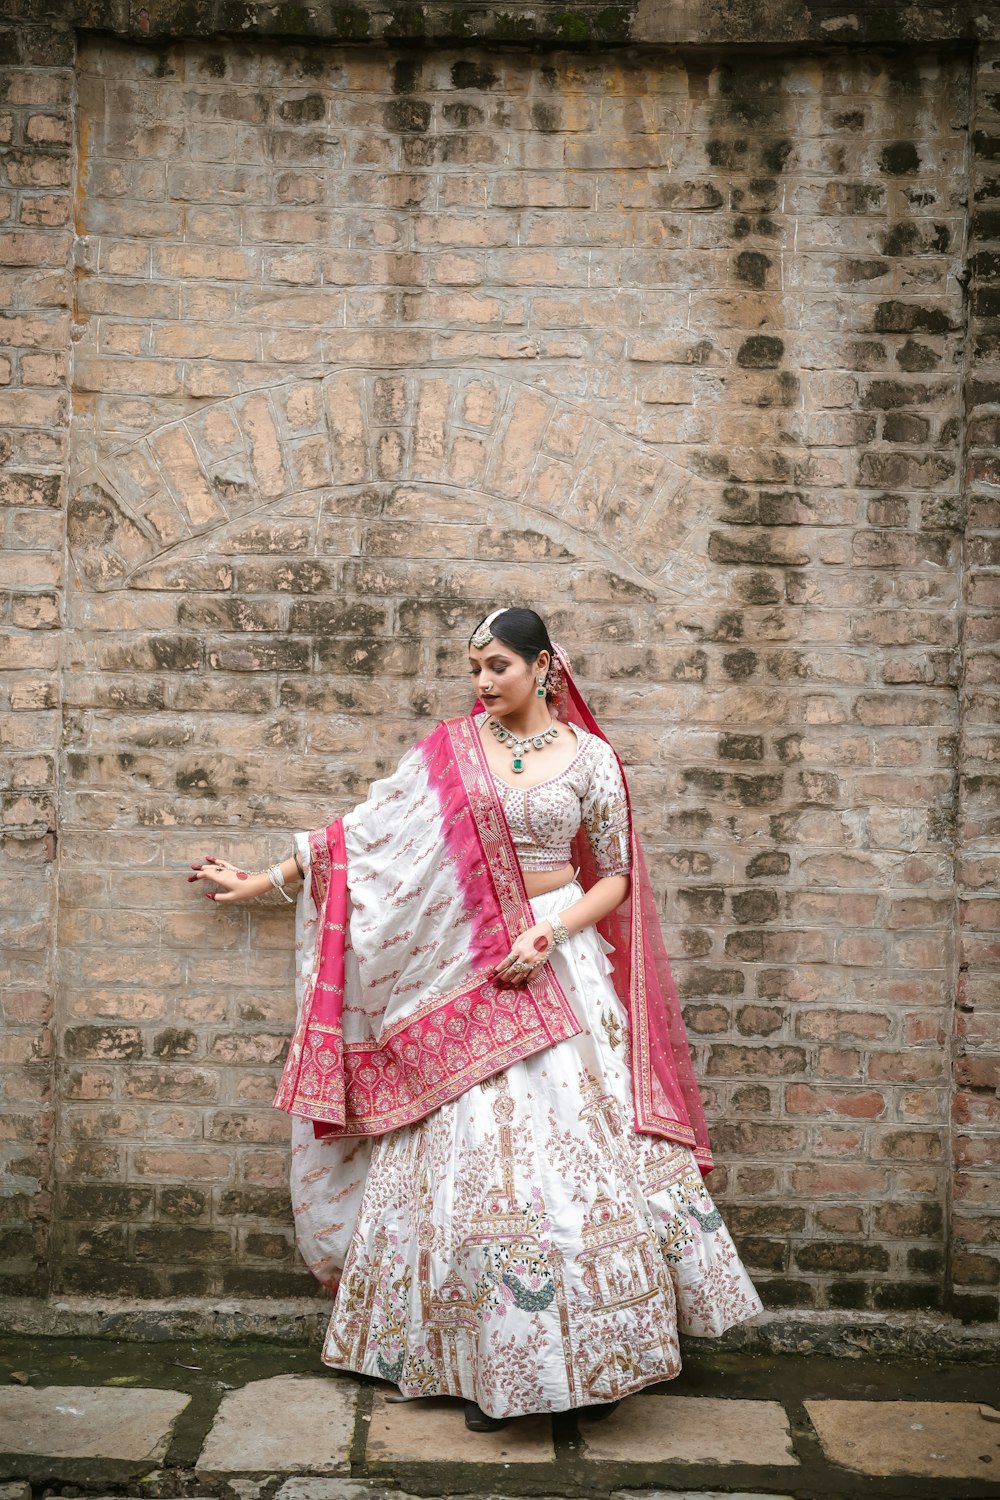 a woman in a white and pink lehenga standing in front of a brick